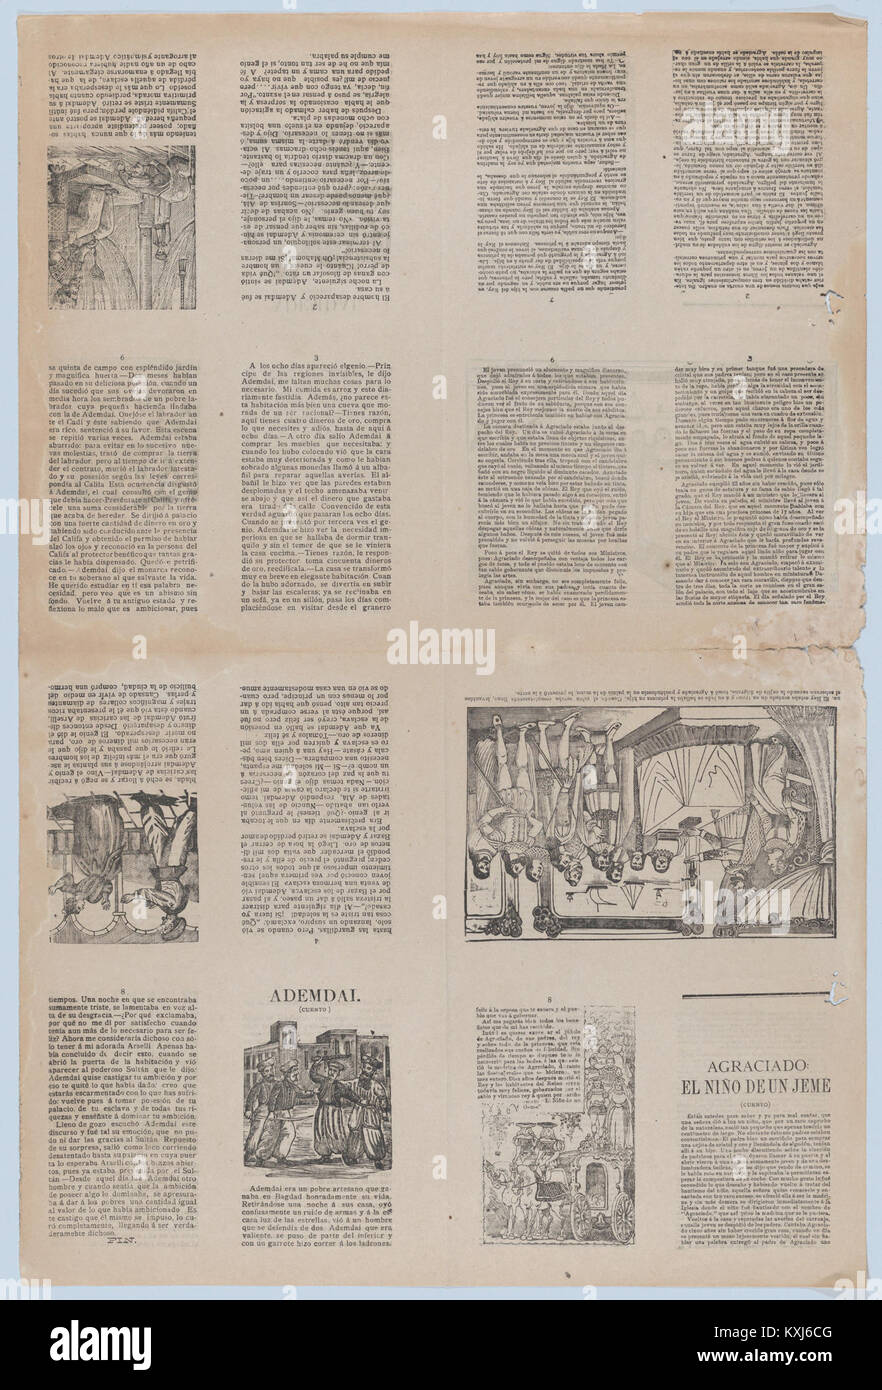 An uncut sheet printed on both sides with pages from 'Ademdai' and 'Agraciado- El niño de un jeme' MET DP873190 Stock Photo